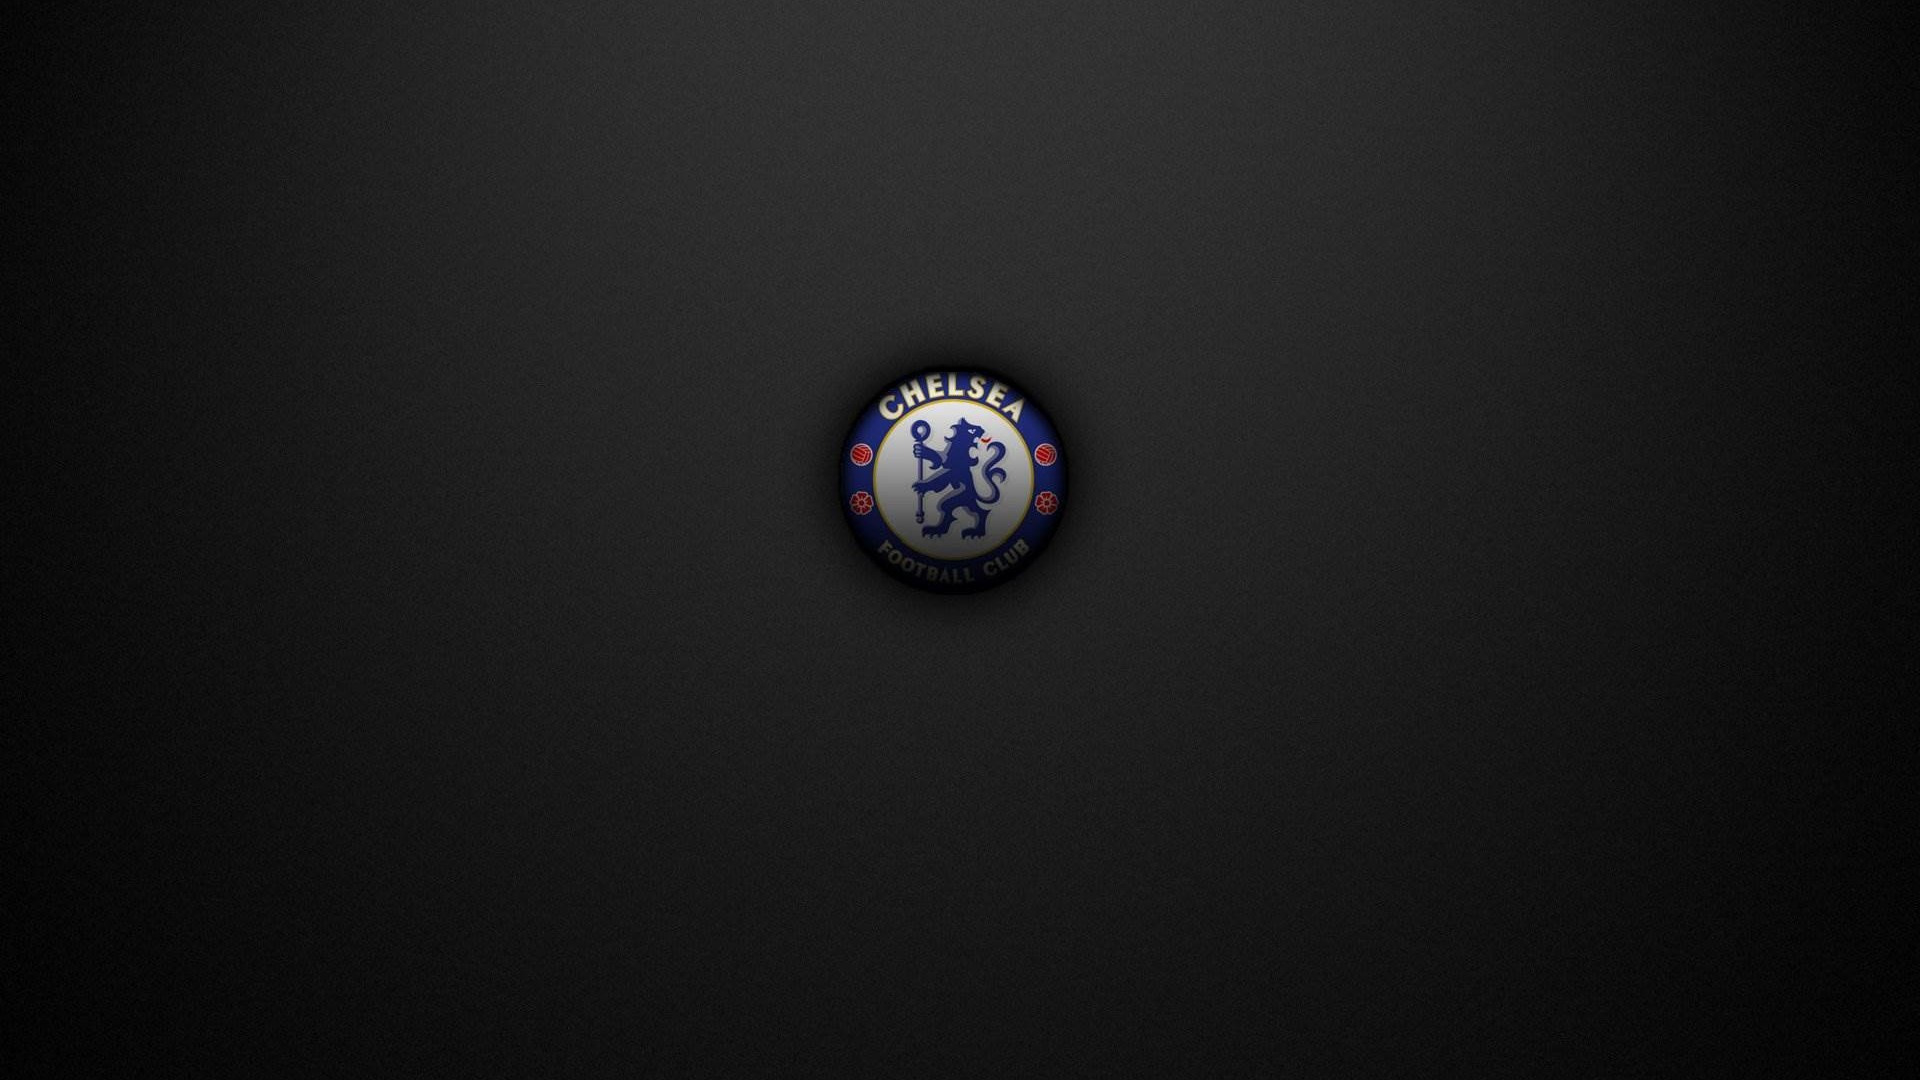 Wallpapers Chelsea Logo With high-resolution 1920X1080 pixel. You can use this wallpaper for your Desktop Computers, Mac Screensavers, Windows Backgrounds, iPhone Wallpapers, Tablet or Android Lock screen and another Mobile device